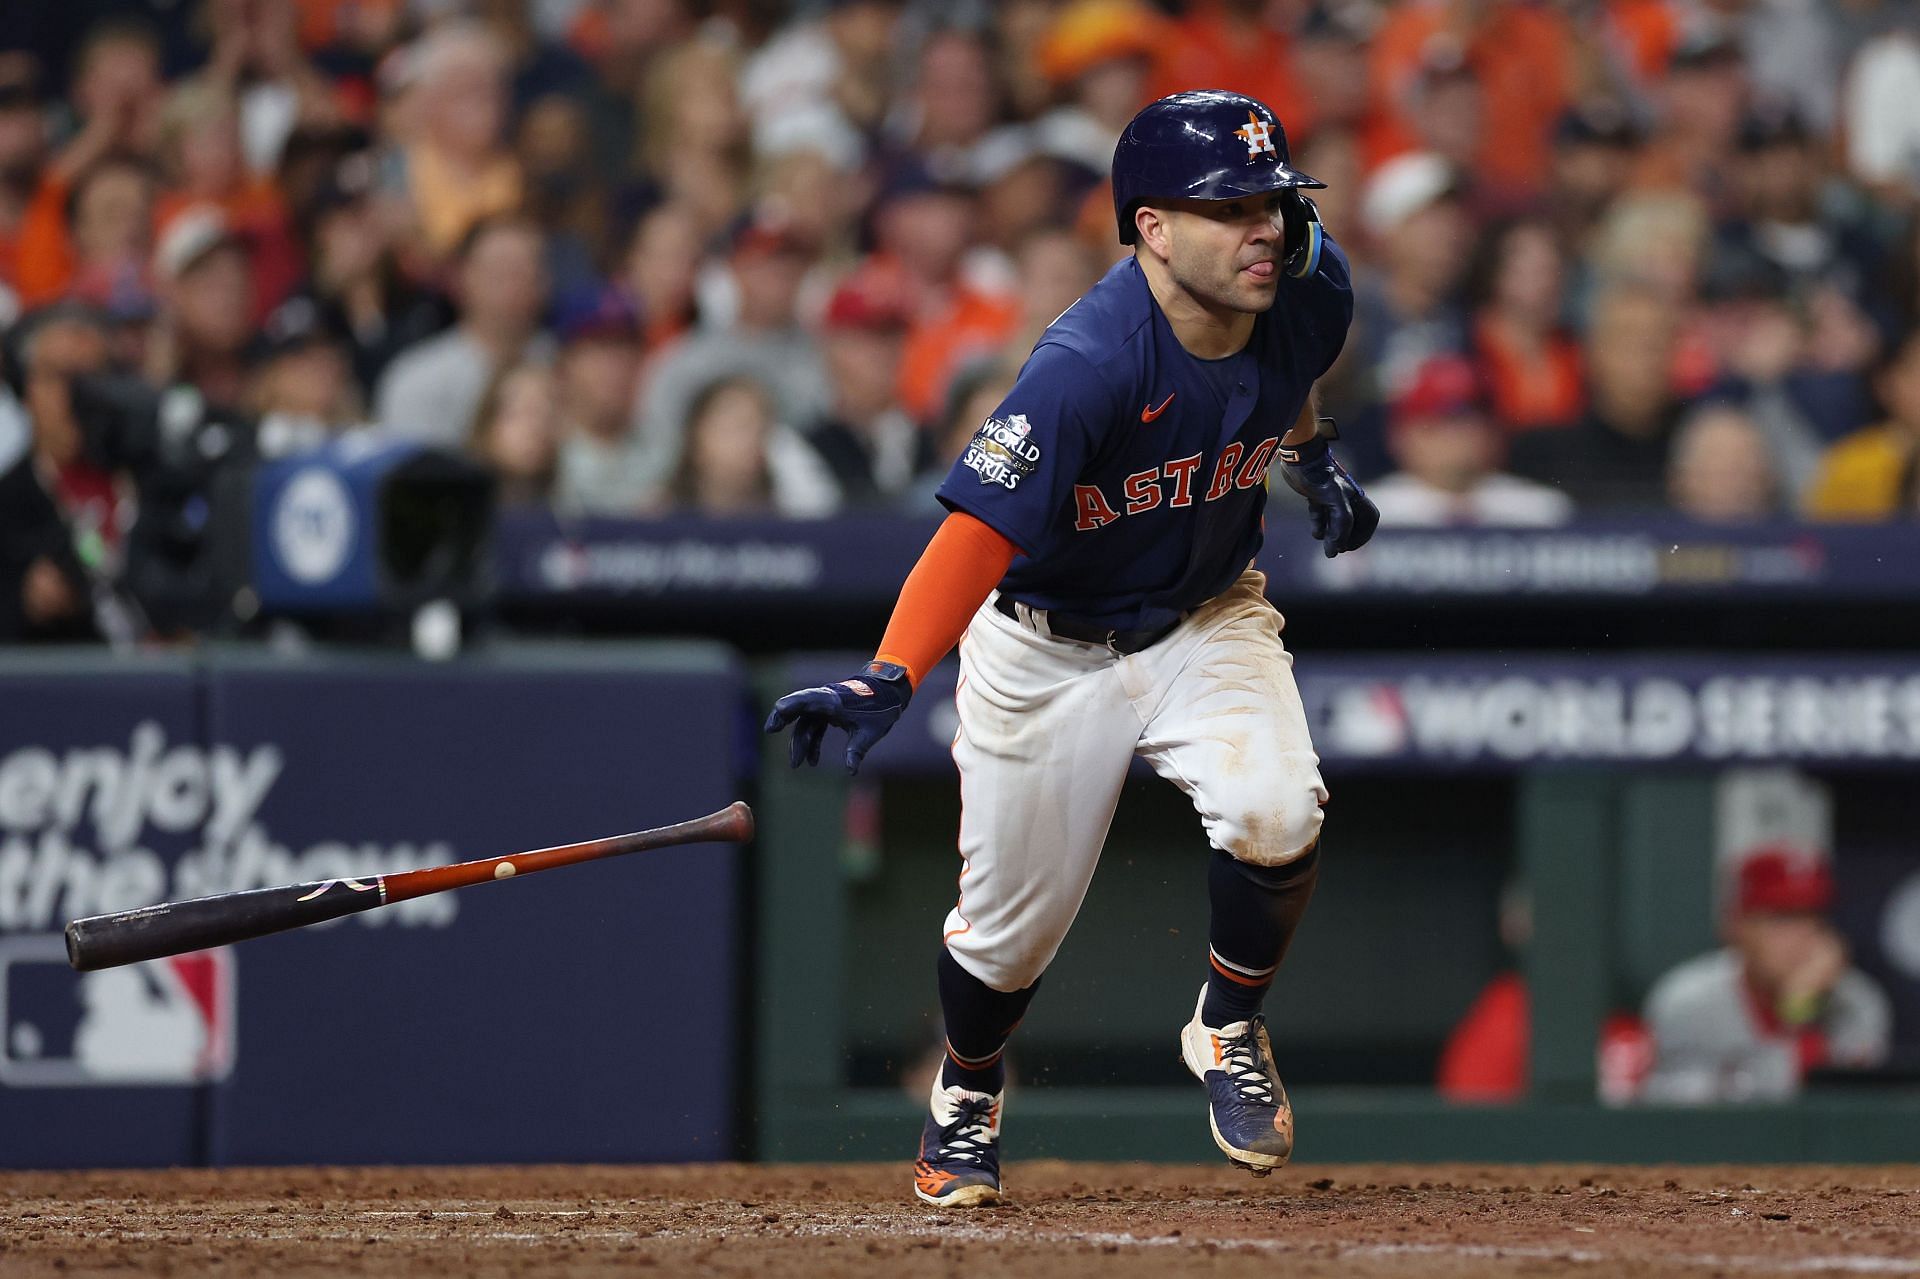 Jose Altuve hits a single against the Philadelphia Phillies in the 2022 World Series at Minute Maid Park